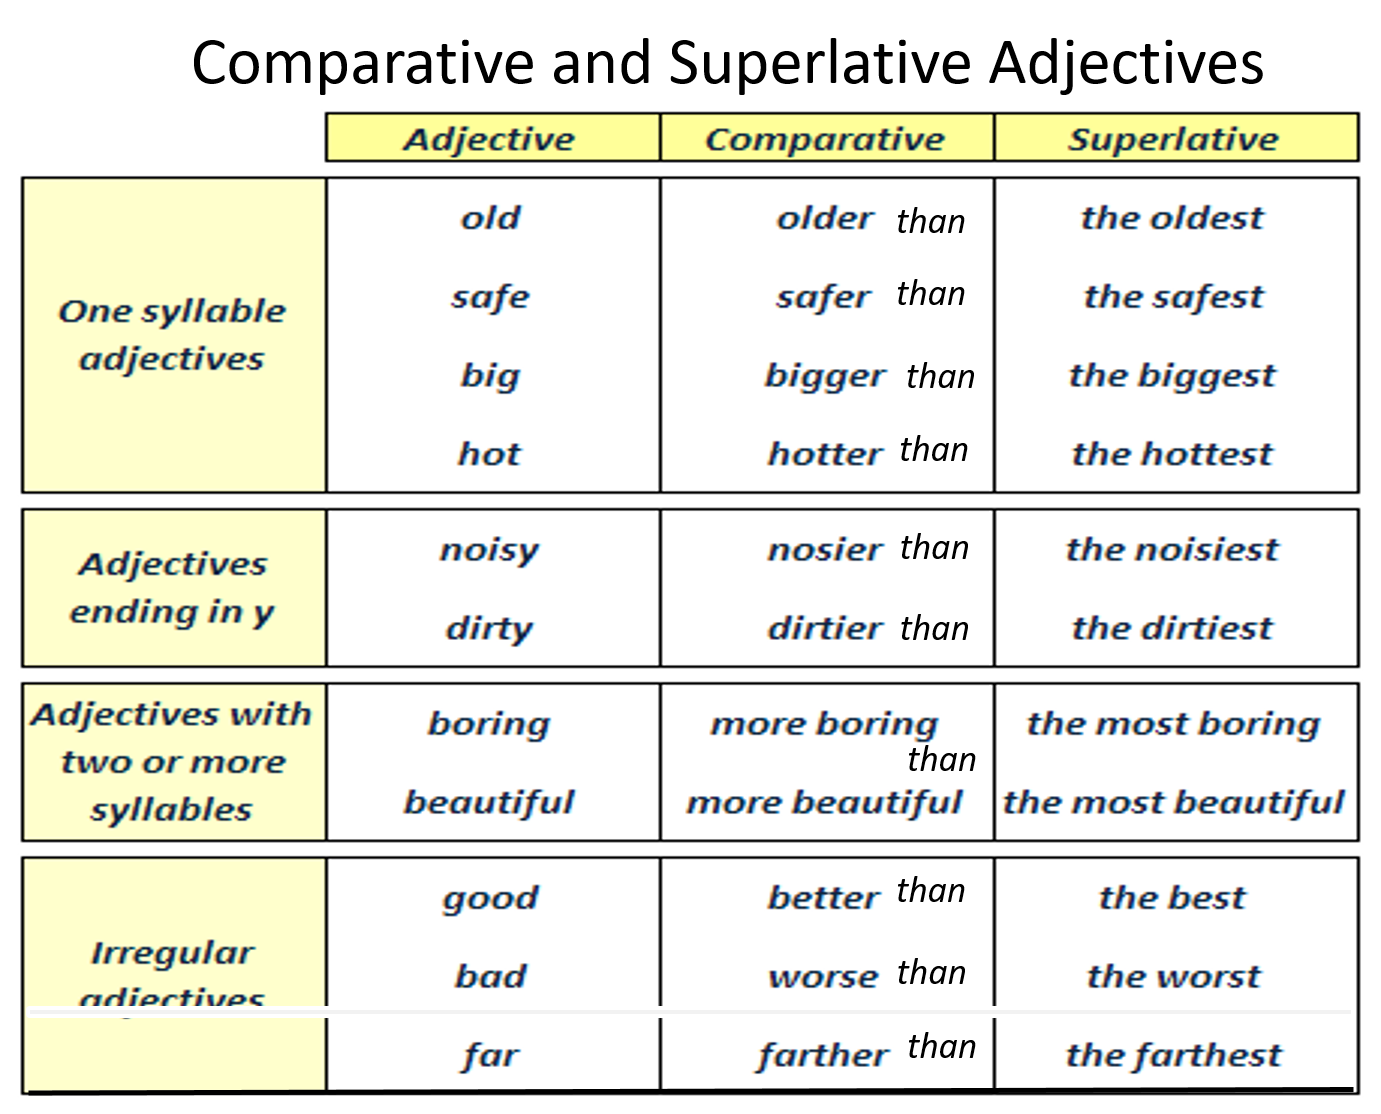 Comparatives long adjectives. Comparatives and Superlatives правило таблица. Comparative adjectives таблица. Таблица Comparative and Superlative. Comparatives and Superlatives правило.